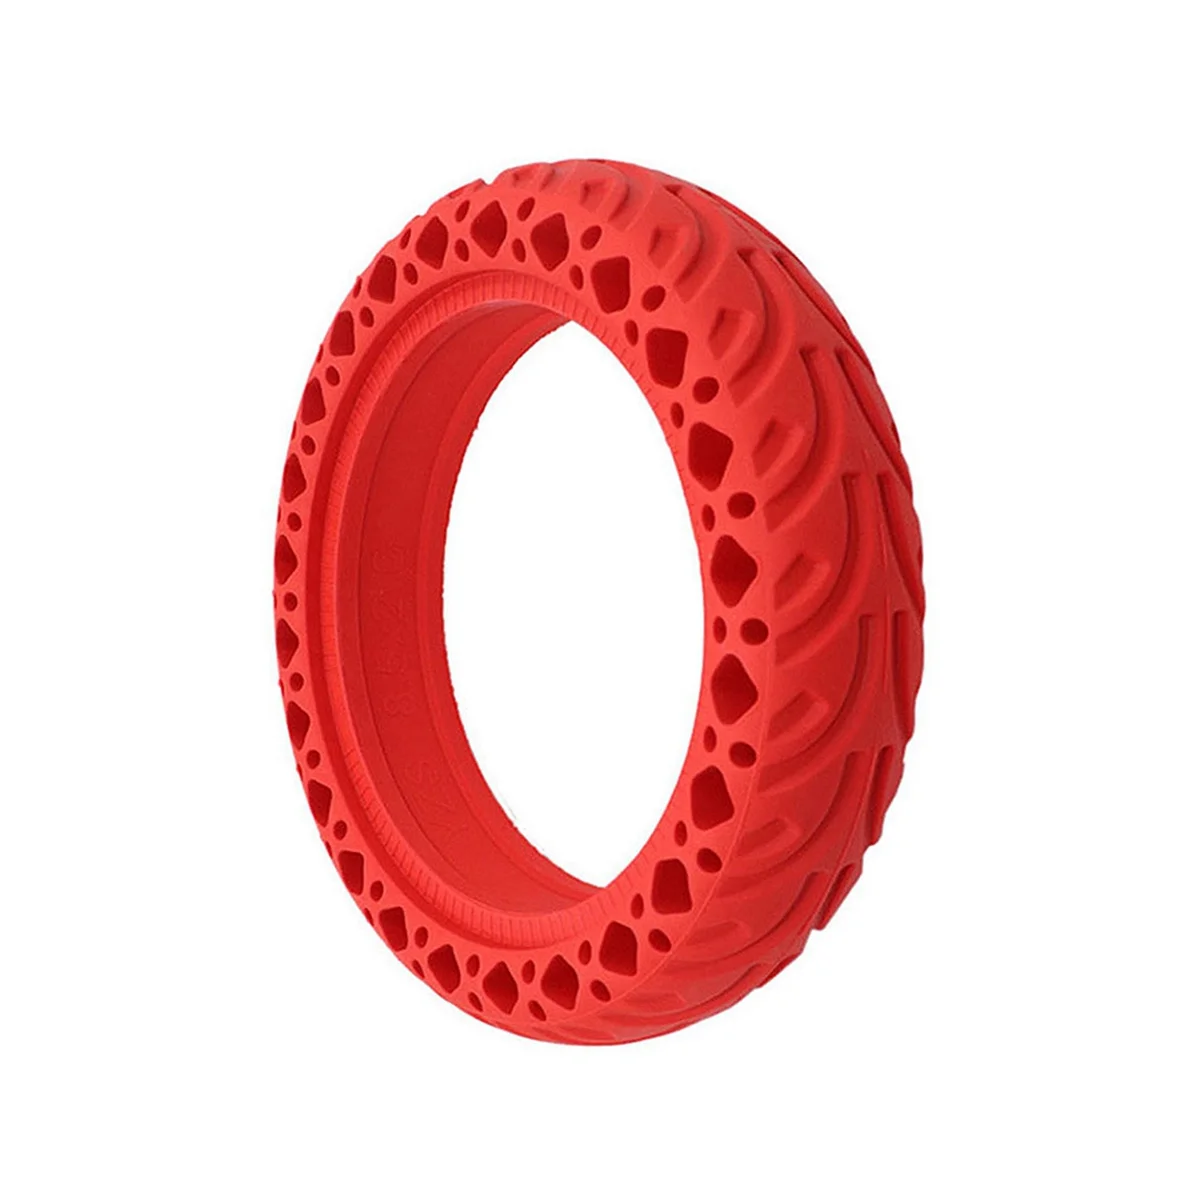 

8.5 Inch Honeycomb Tire for Xiaomi M365 Pro1S Pro2 MI3 Electric Scooter 8.5X2 Size Shock Absorber Damping Tyre Red